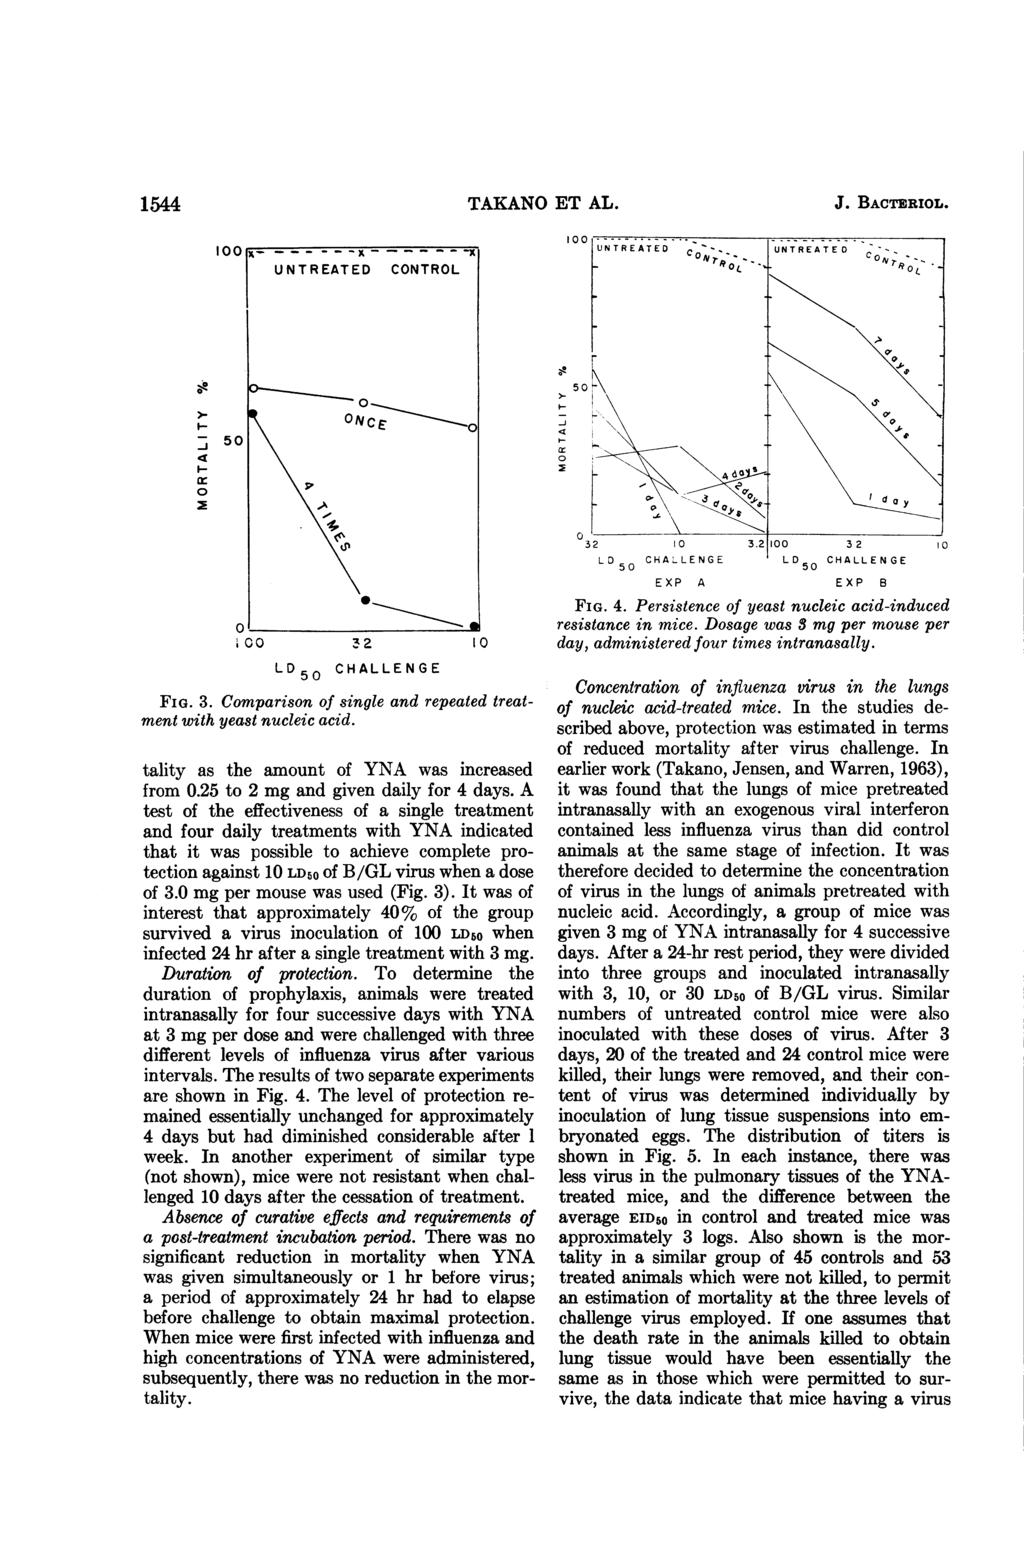 1544 TAKANO ET AL. J. BACTERIOL. S~~~~~~~~ I 5 I-- O 3 2 1 L D5 CHALLENGE FIG. 3. Comparison of single and repeated treatment with yeast nucleic acid. tality as the amount of YNA was increased from.